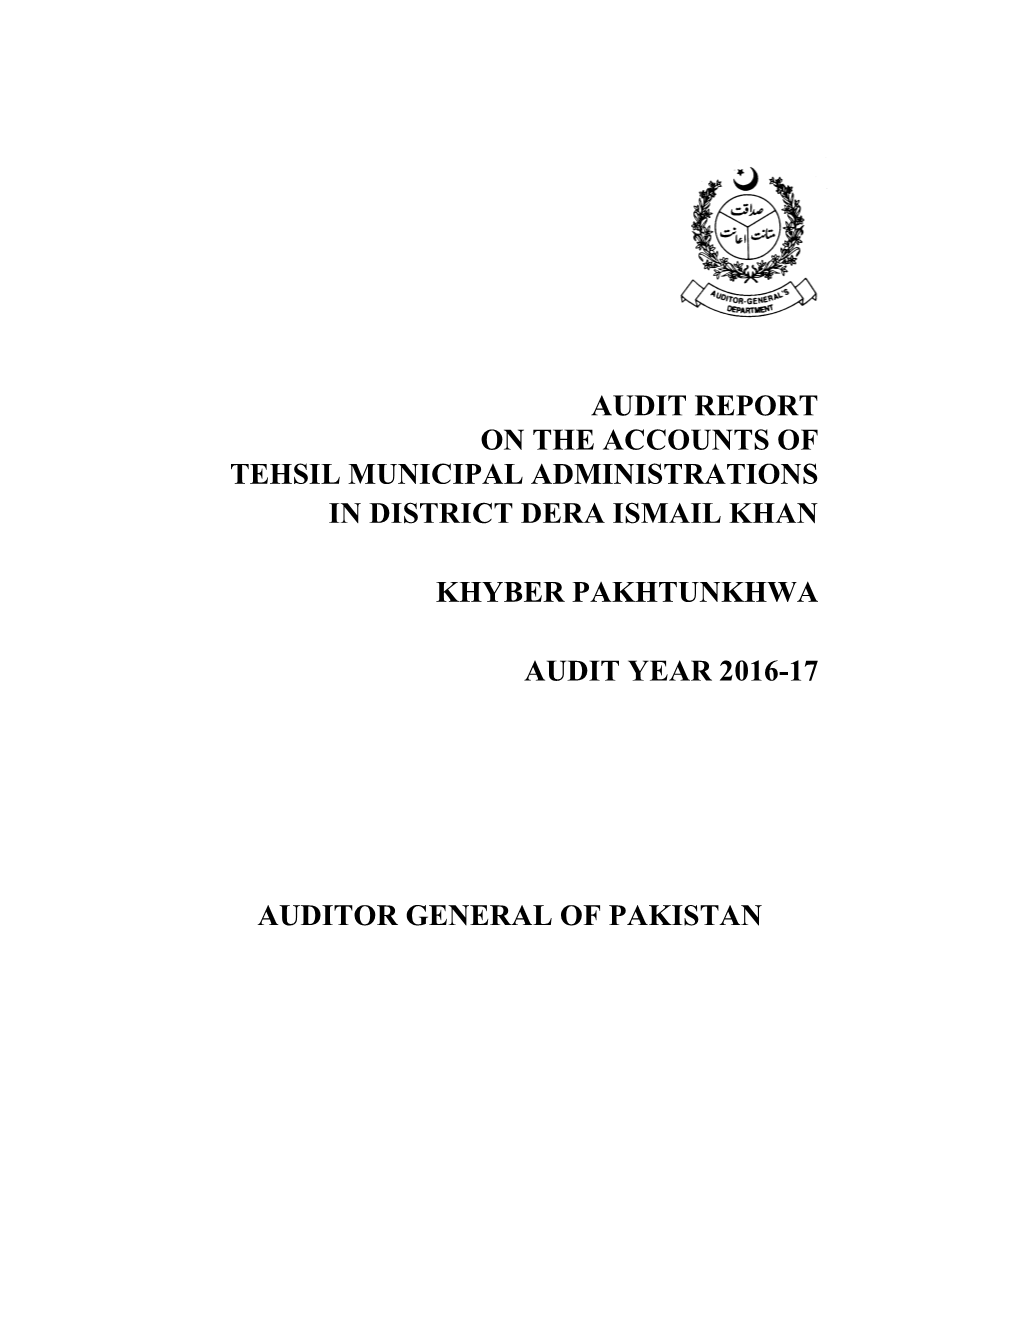 Audit Report on the Accounts of Tehsil Municipal Administrations in District Dera Ismail Khan